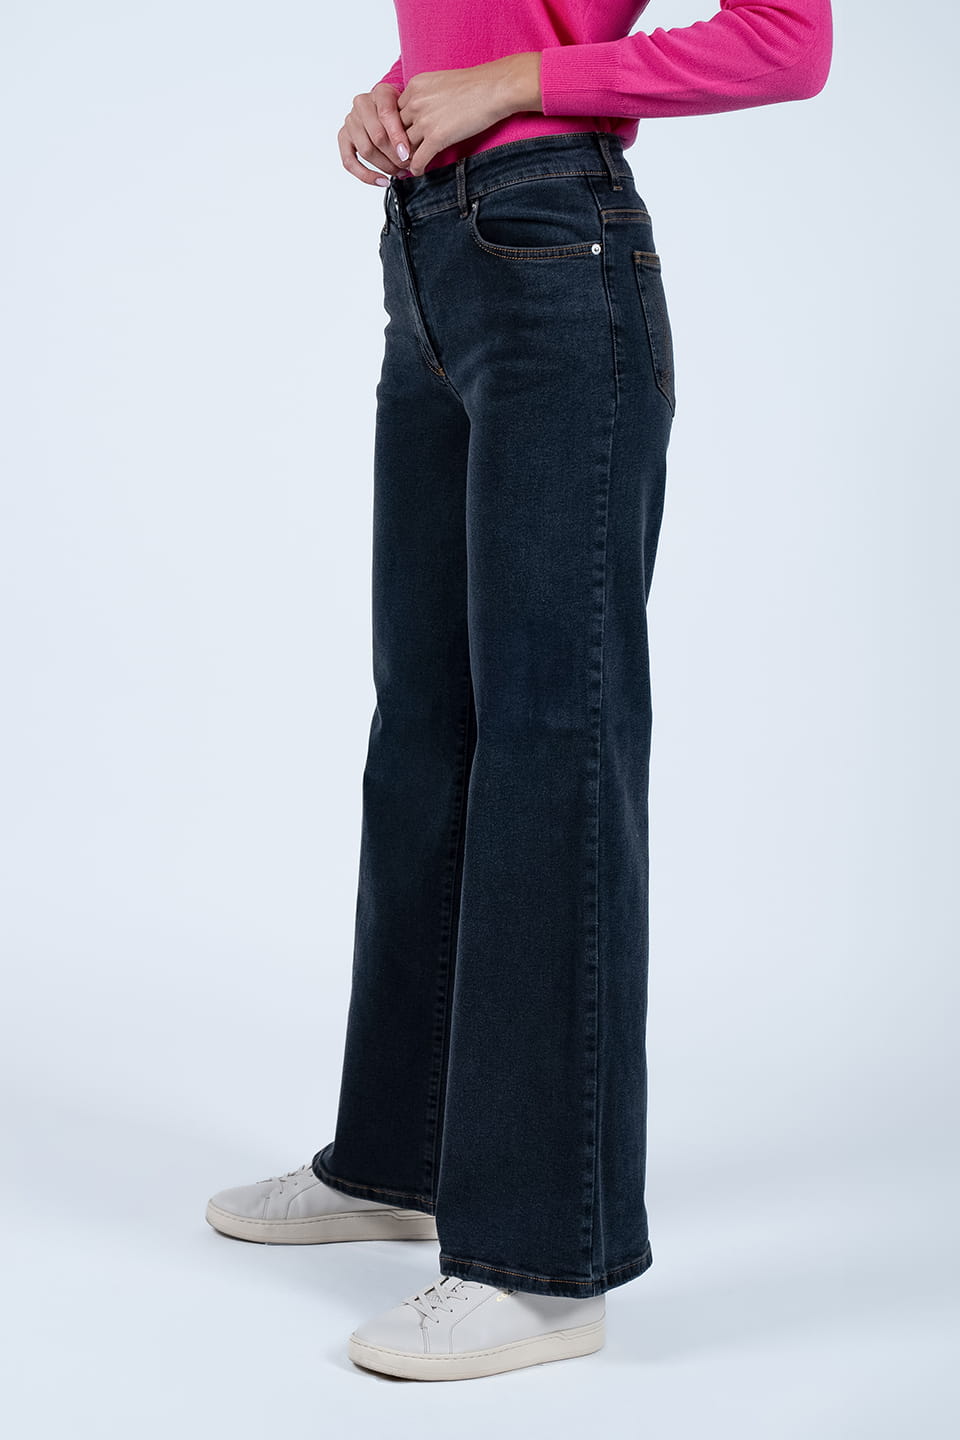 Designer Black Jeans, shop online with free delivery in UAE. Product gallery 2